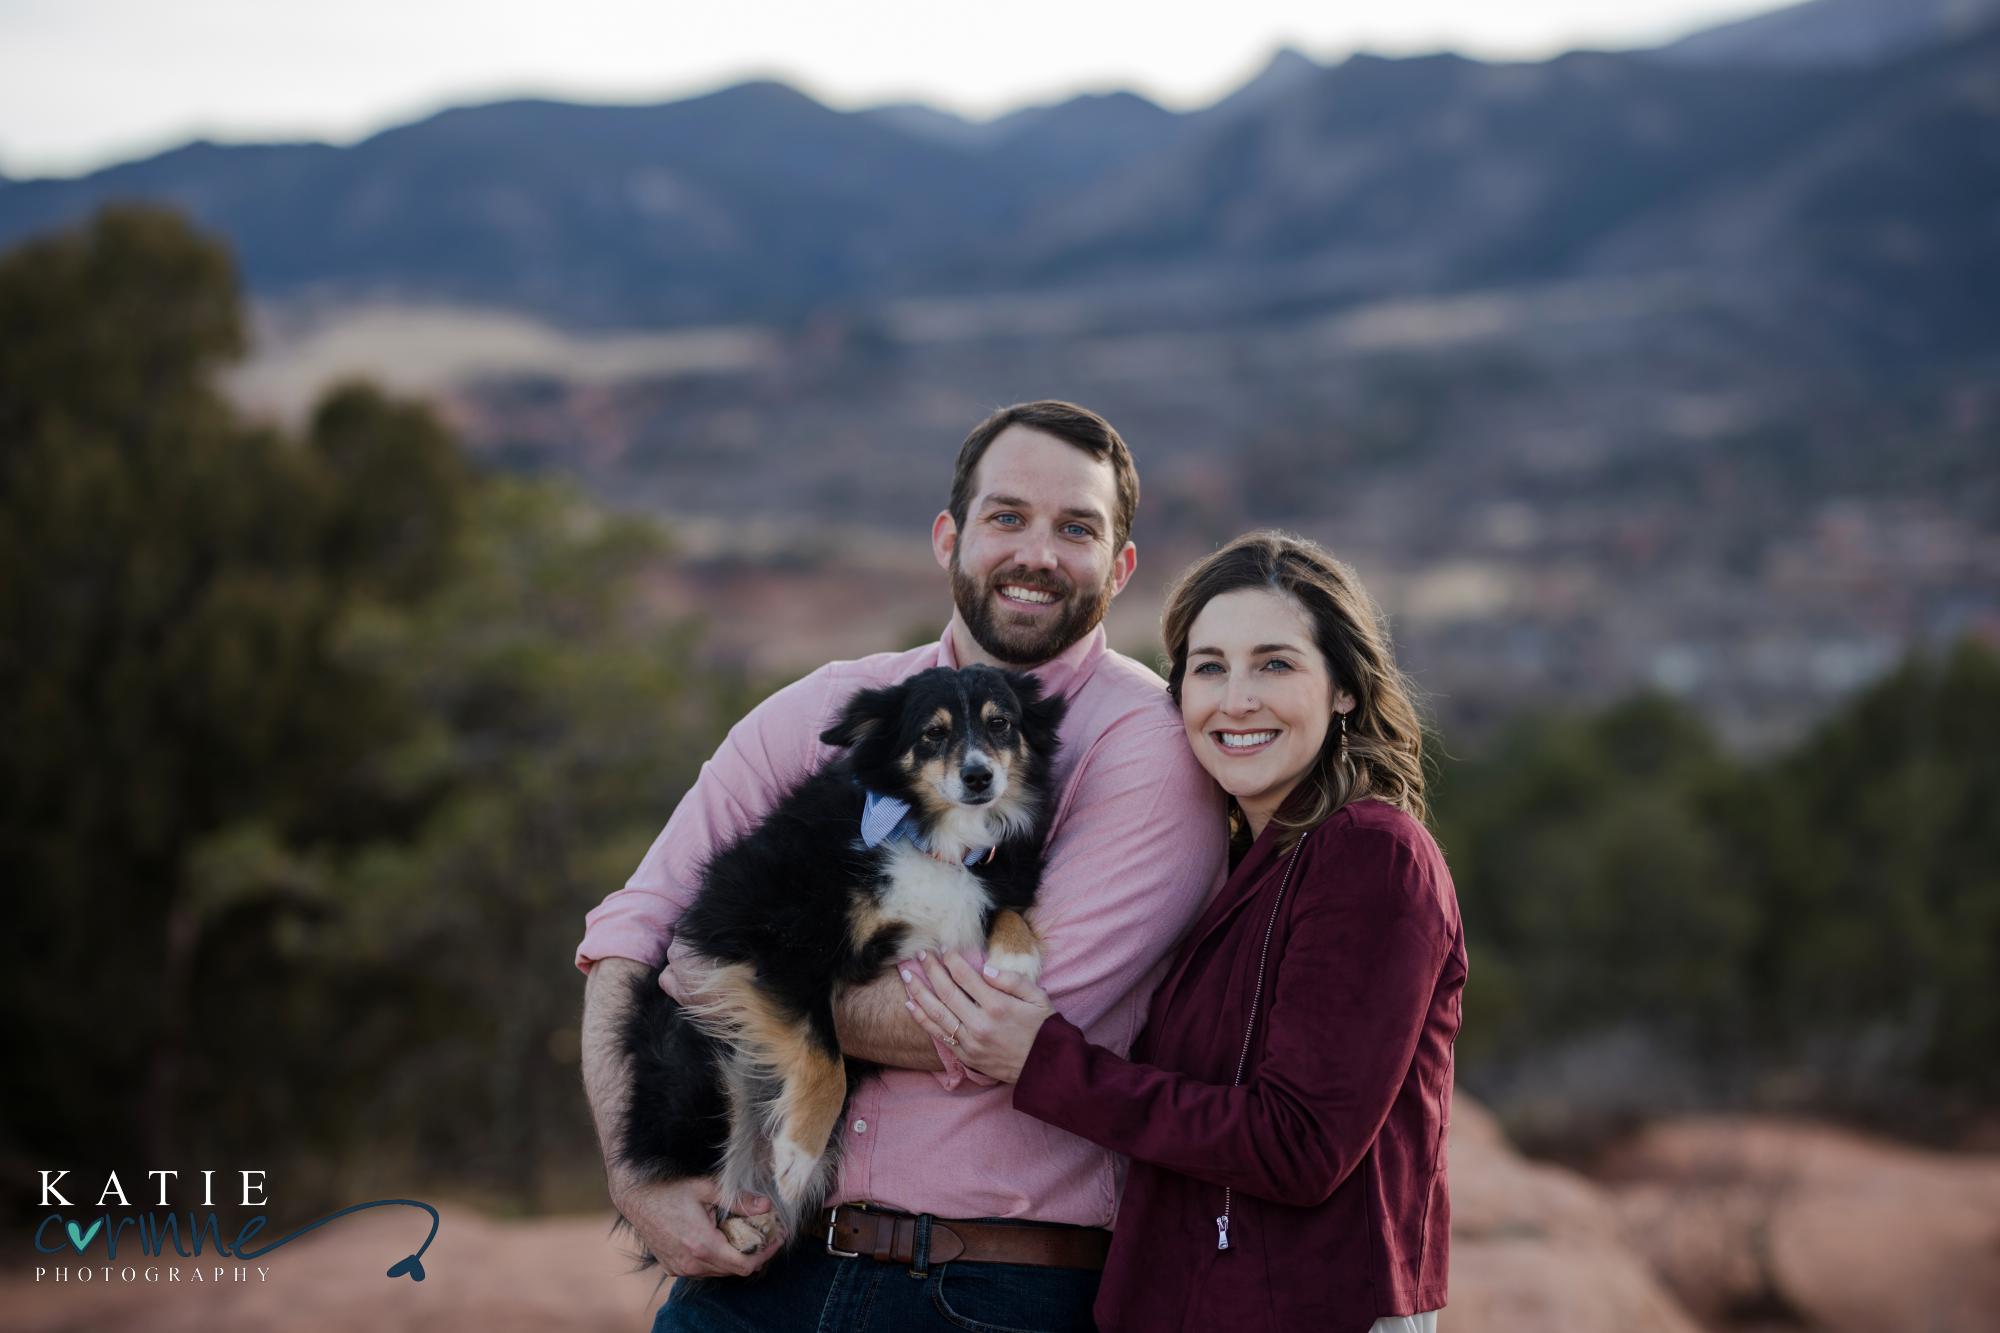 Man holds dog with new fiance and pose for photos